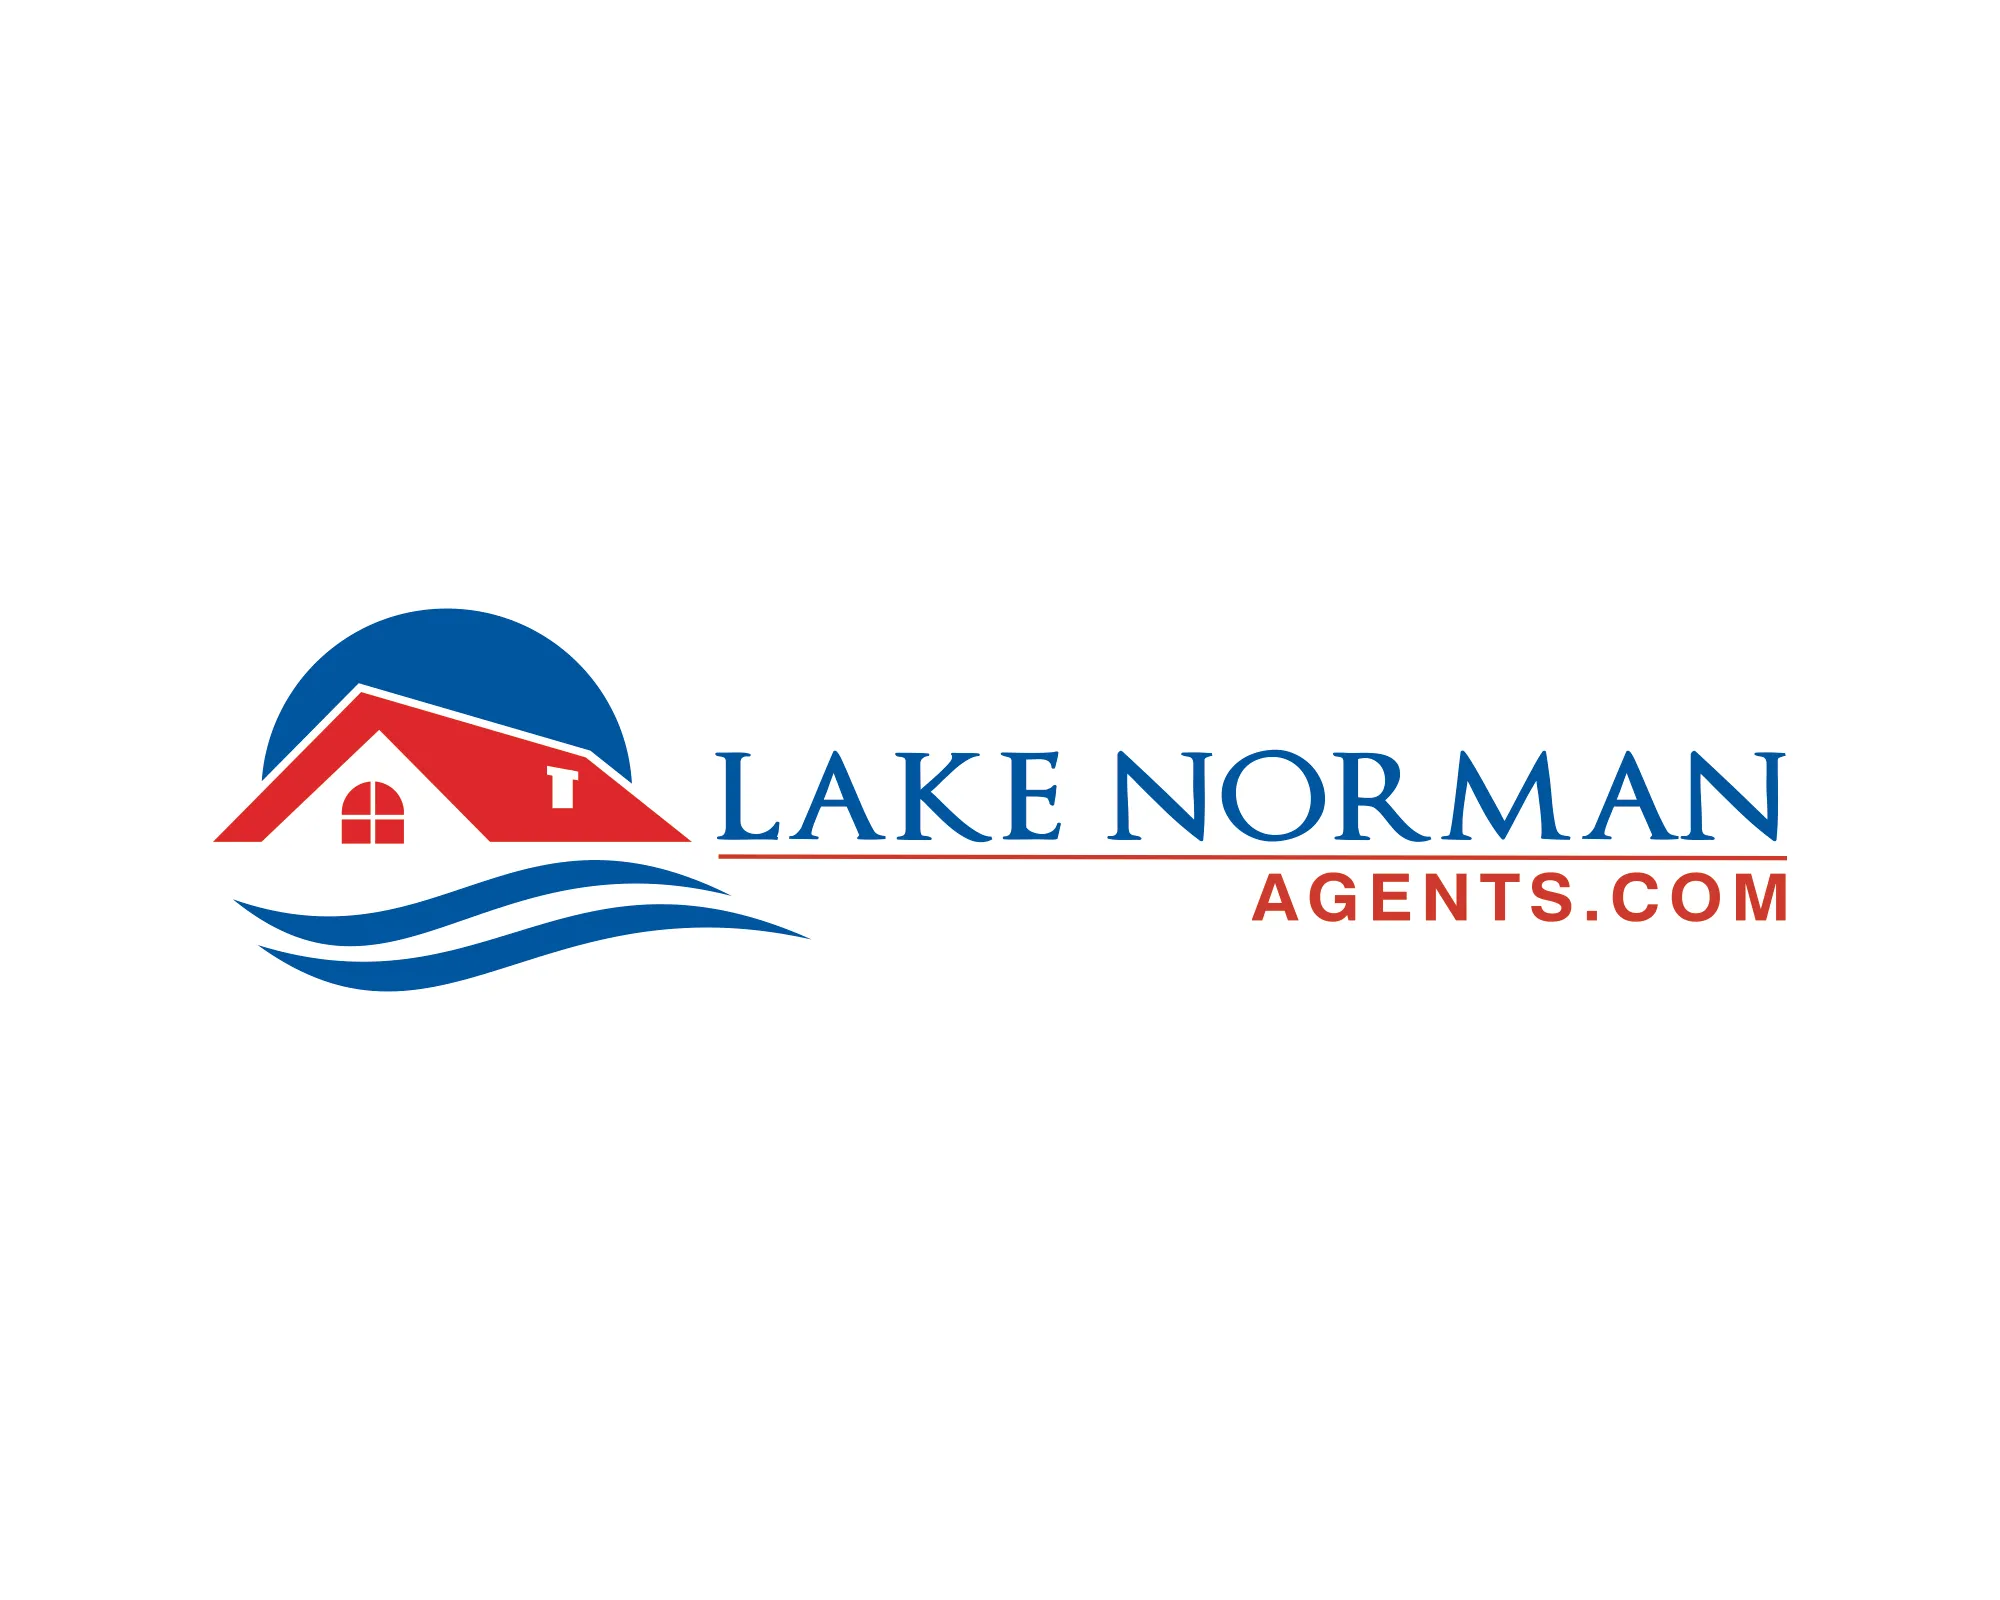 Lake Norman Agents